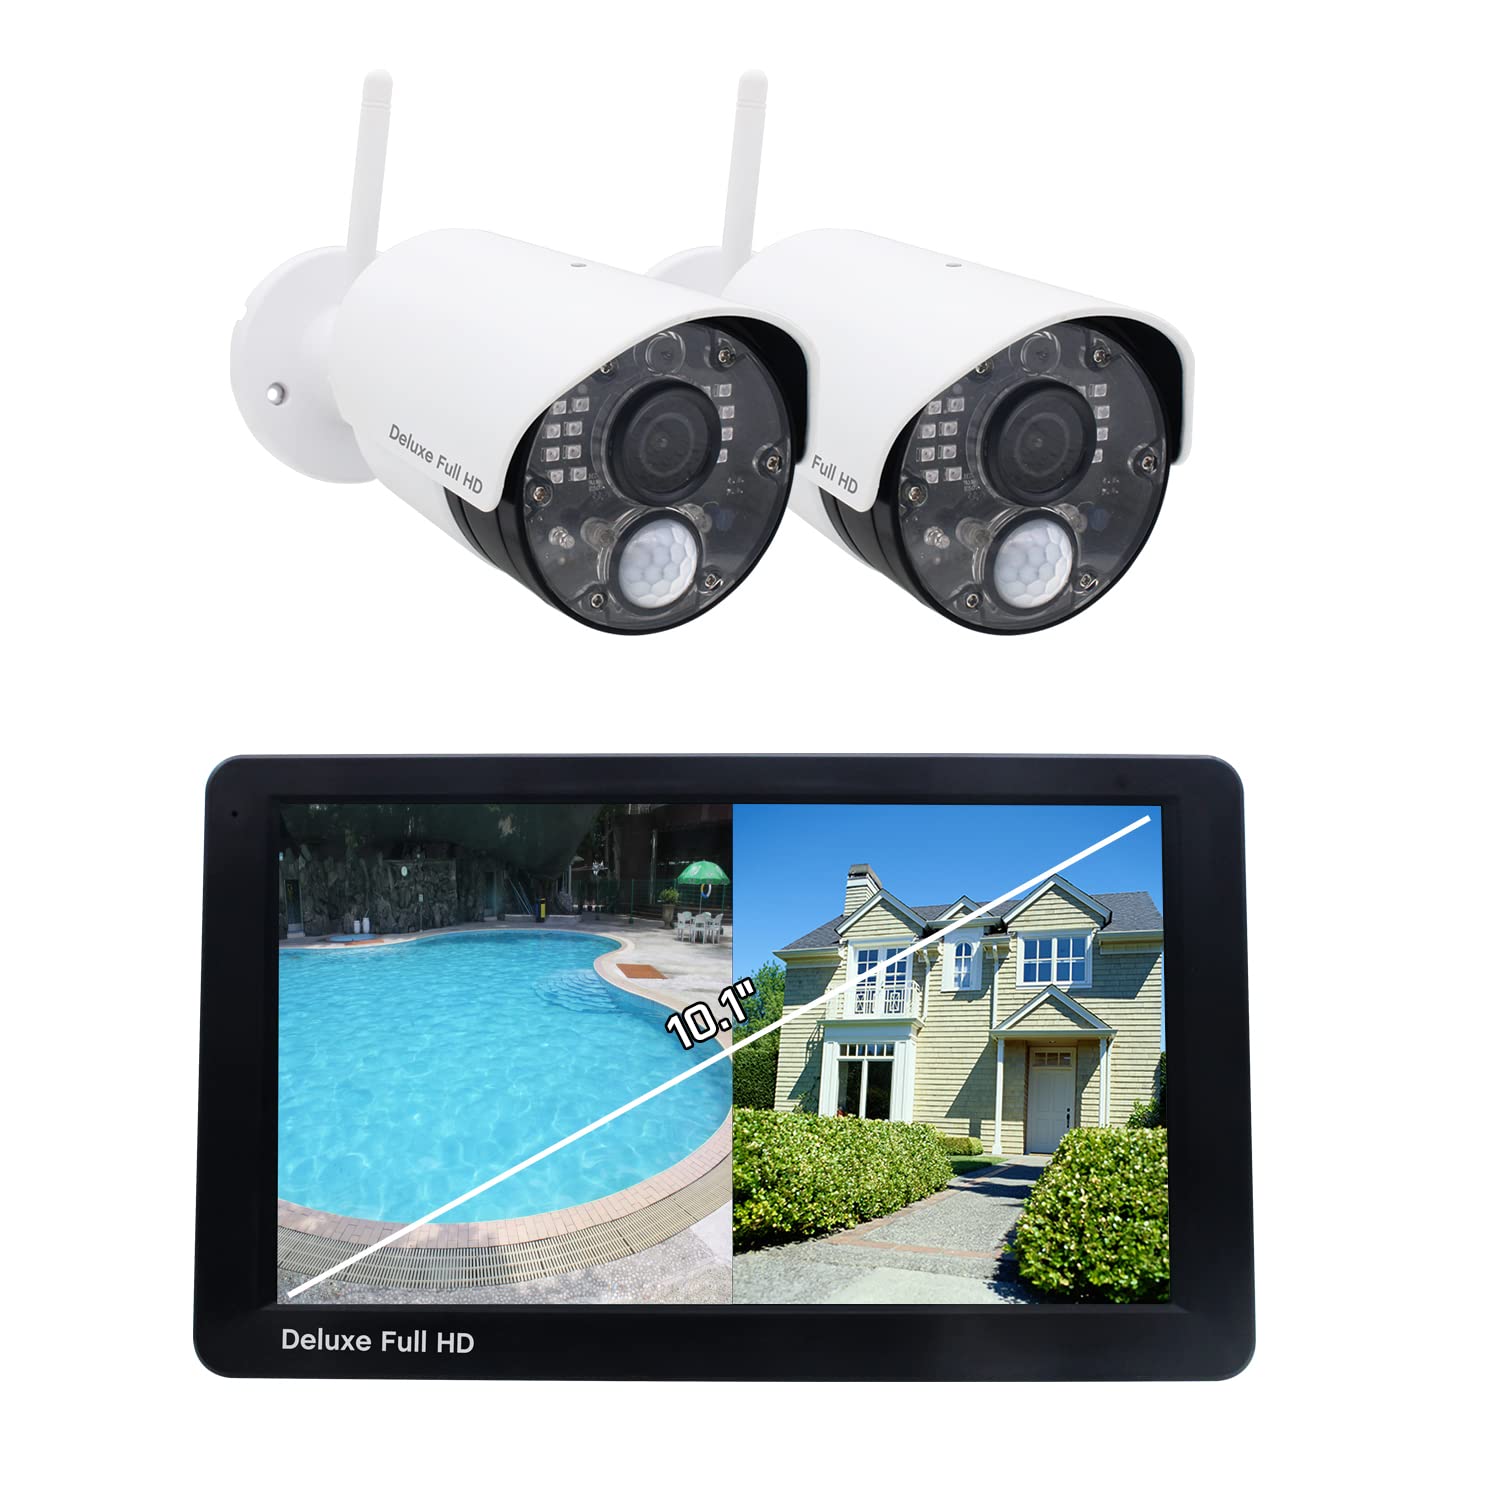 casacam Deluxe VS5102A Security camera System with 1080p cameras and 101 Large Touchscreen Monitor, Two-Way Audio, Free APP, 32g